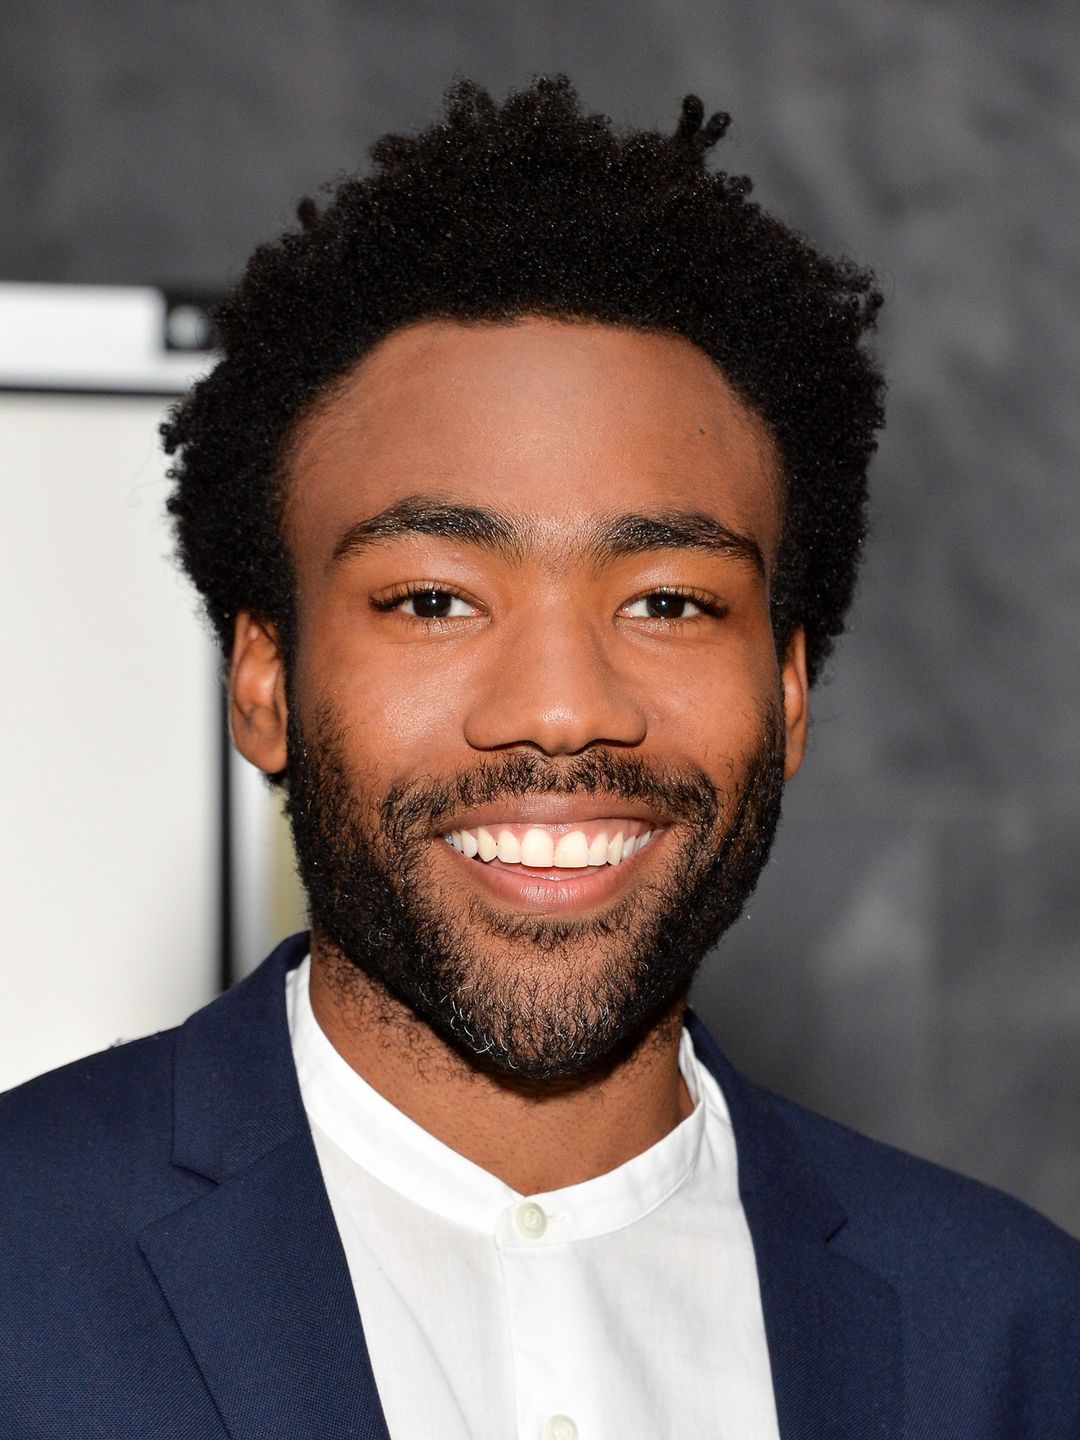 Donald Glover where did he study